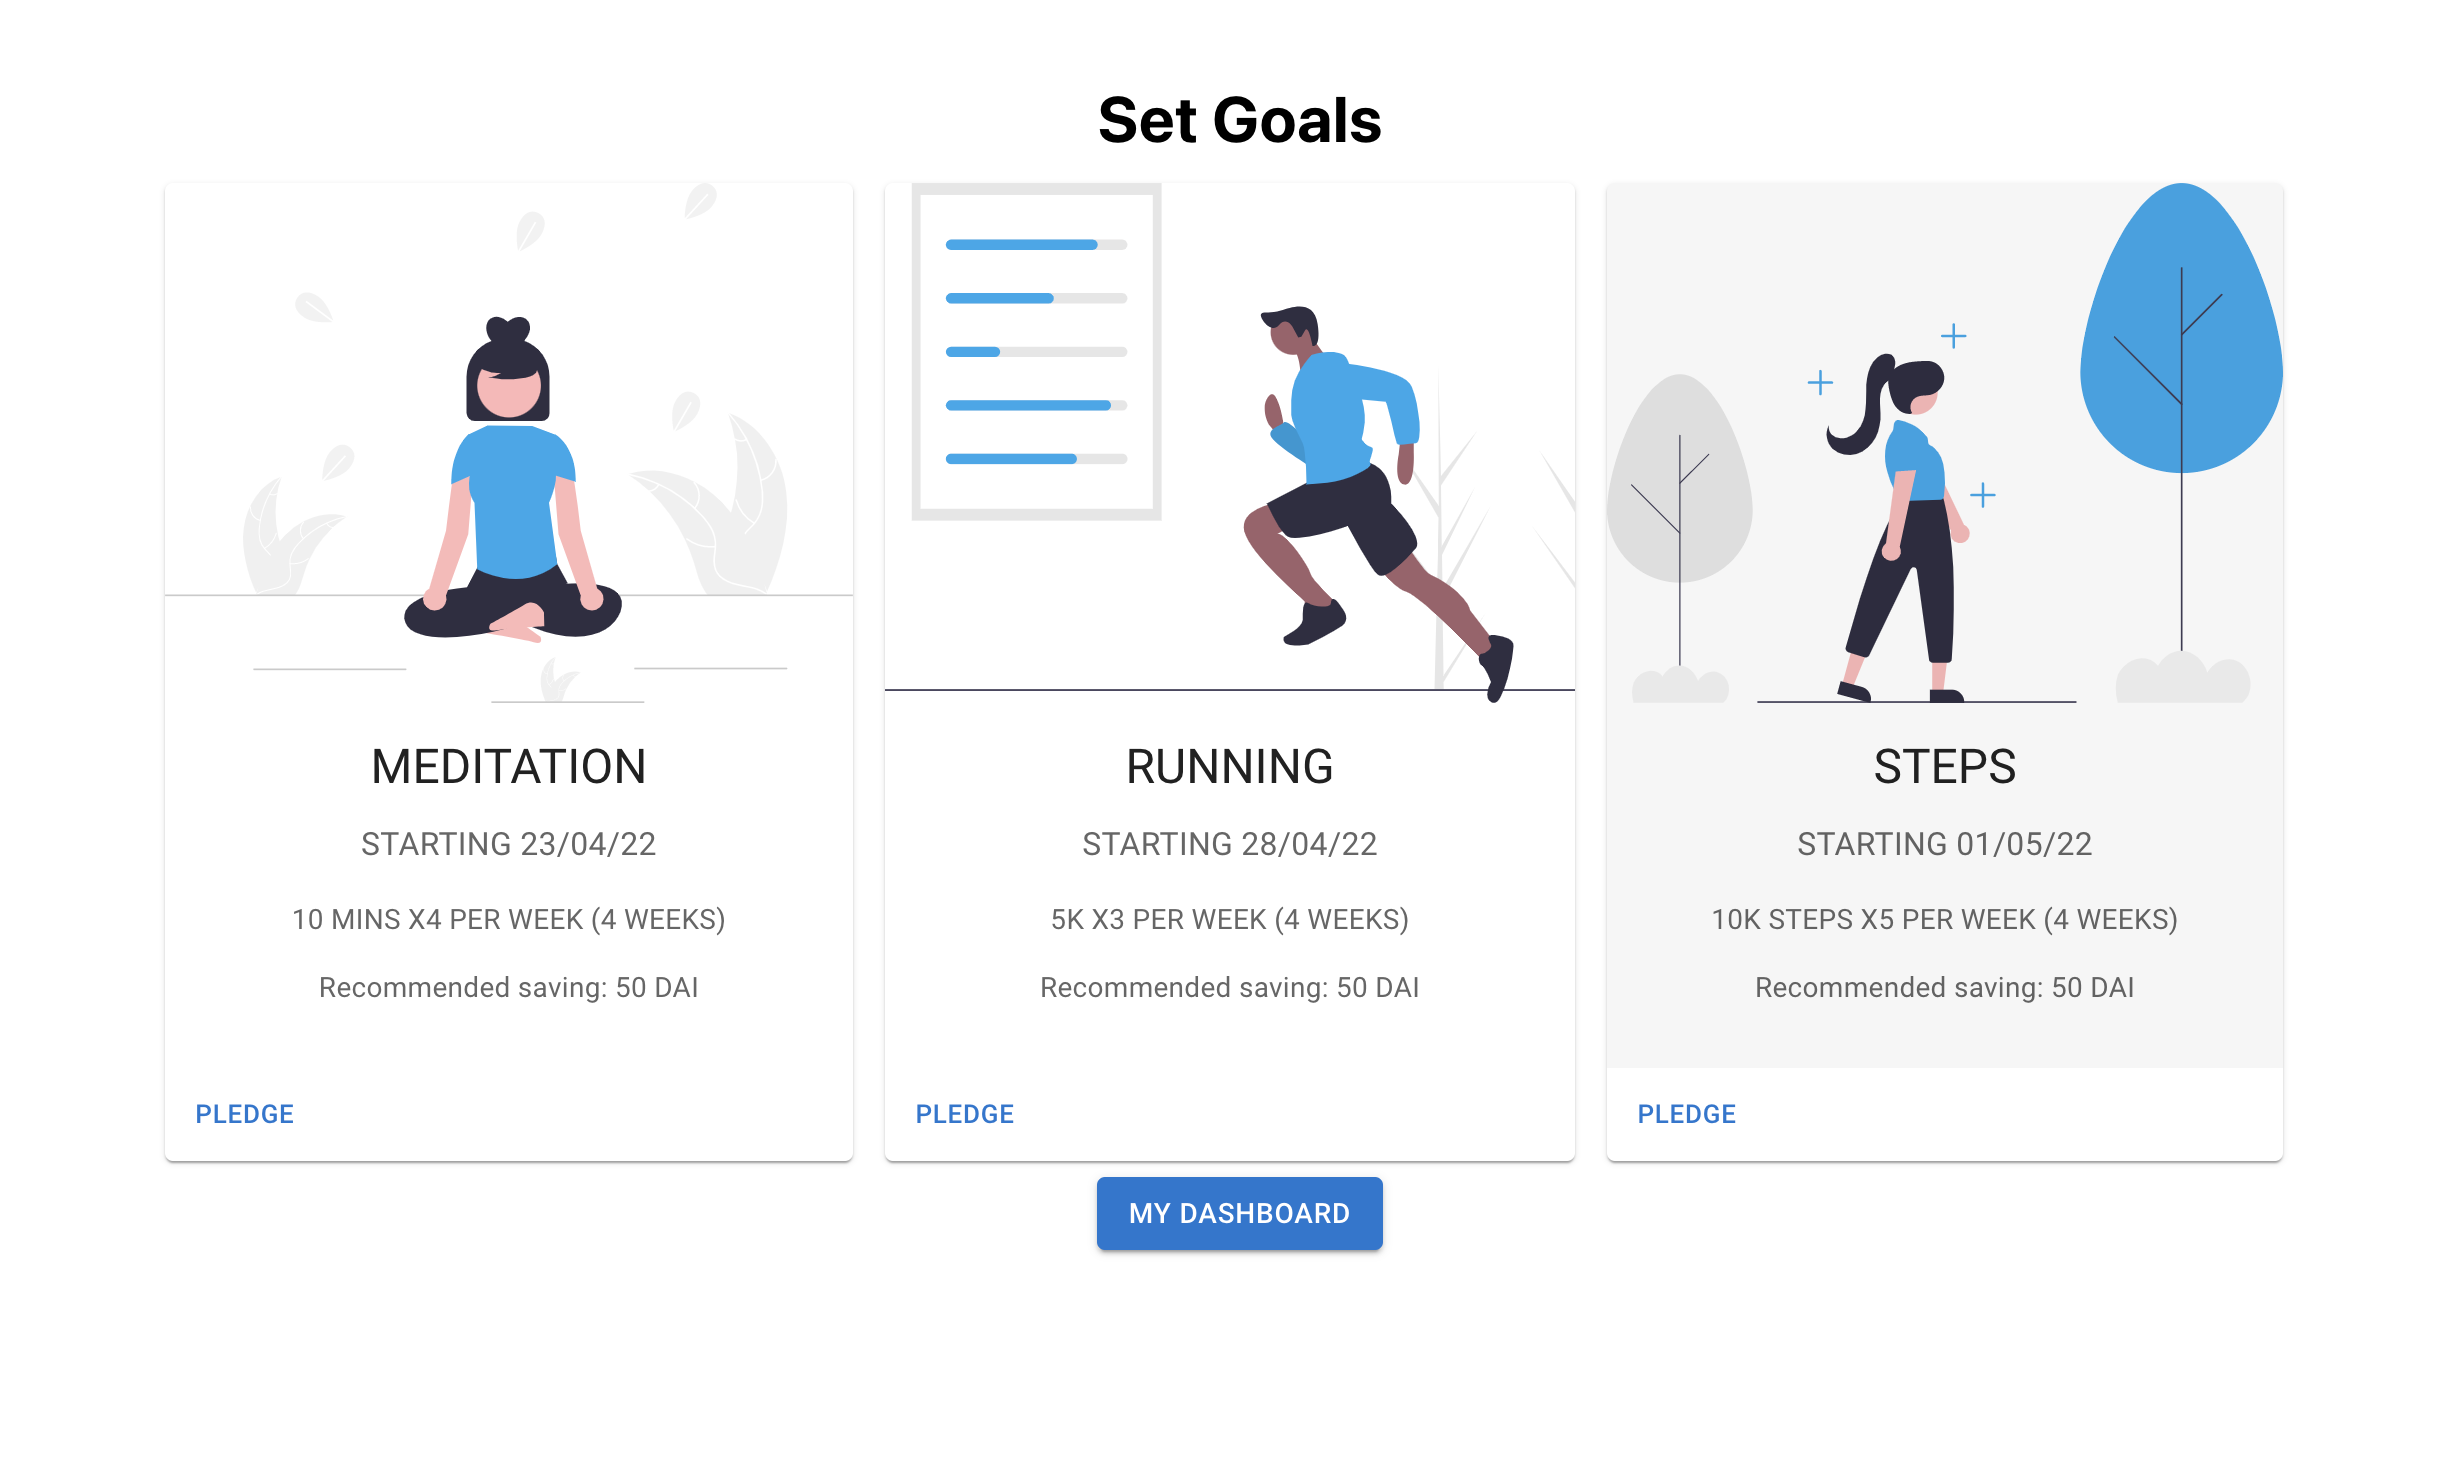 The Set Goals Page